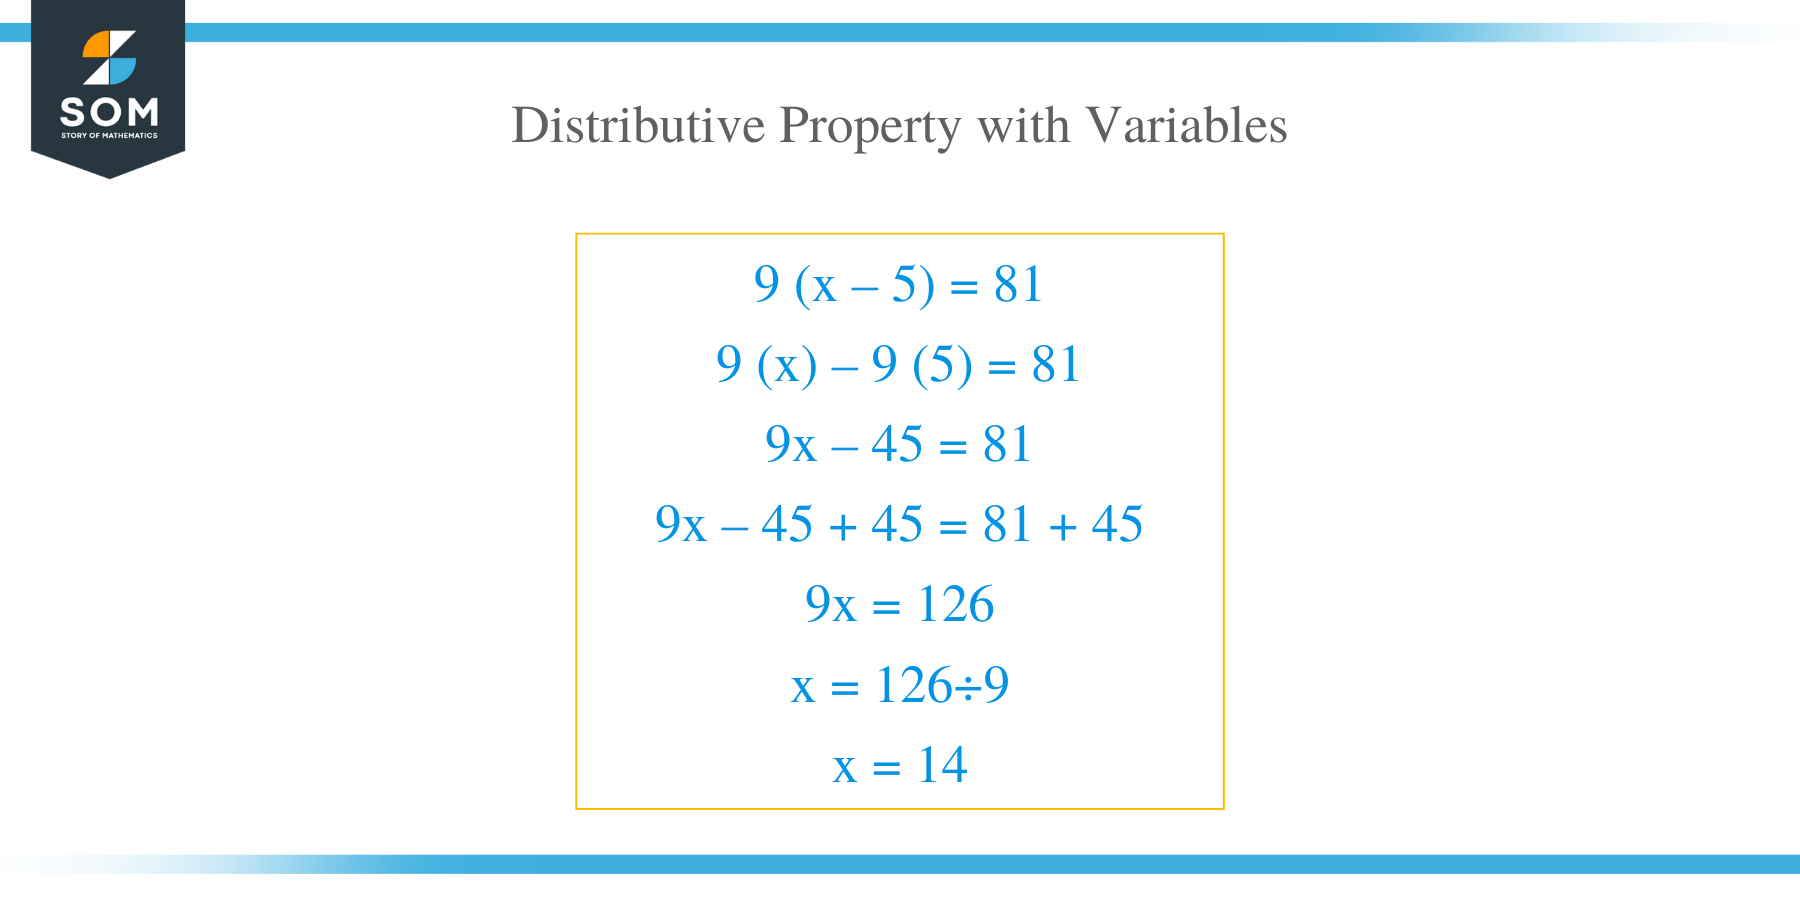 Distributive Property with Variables